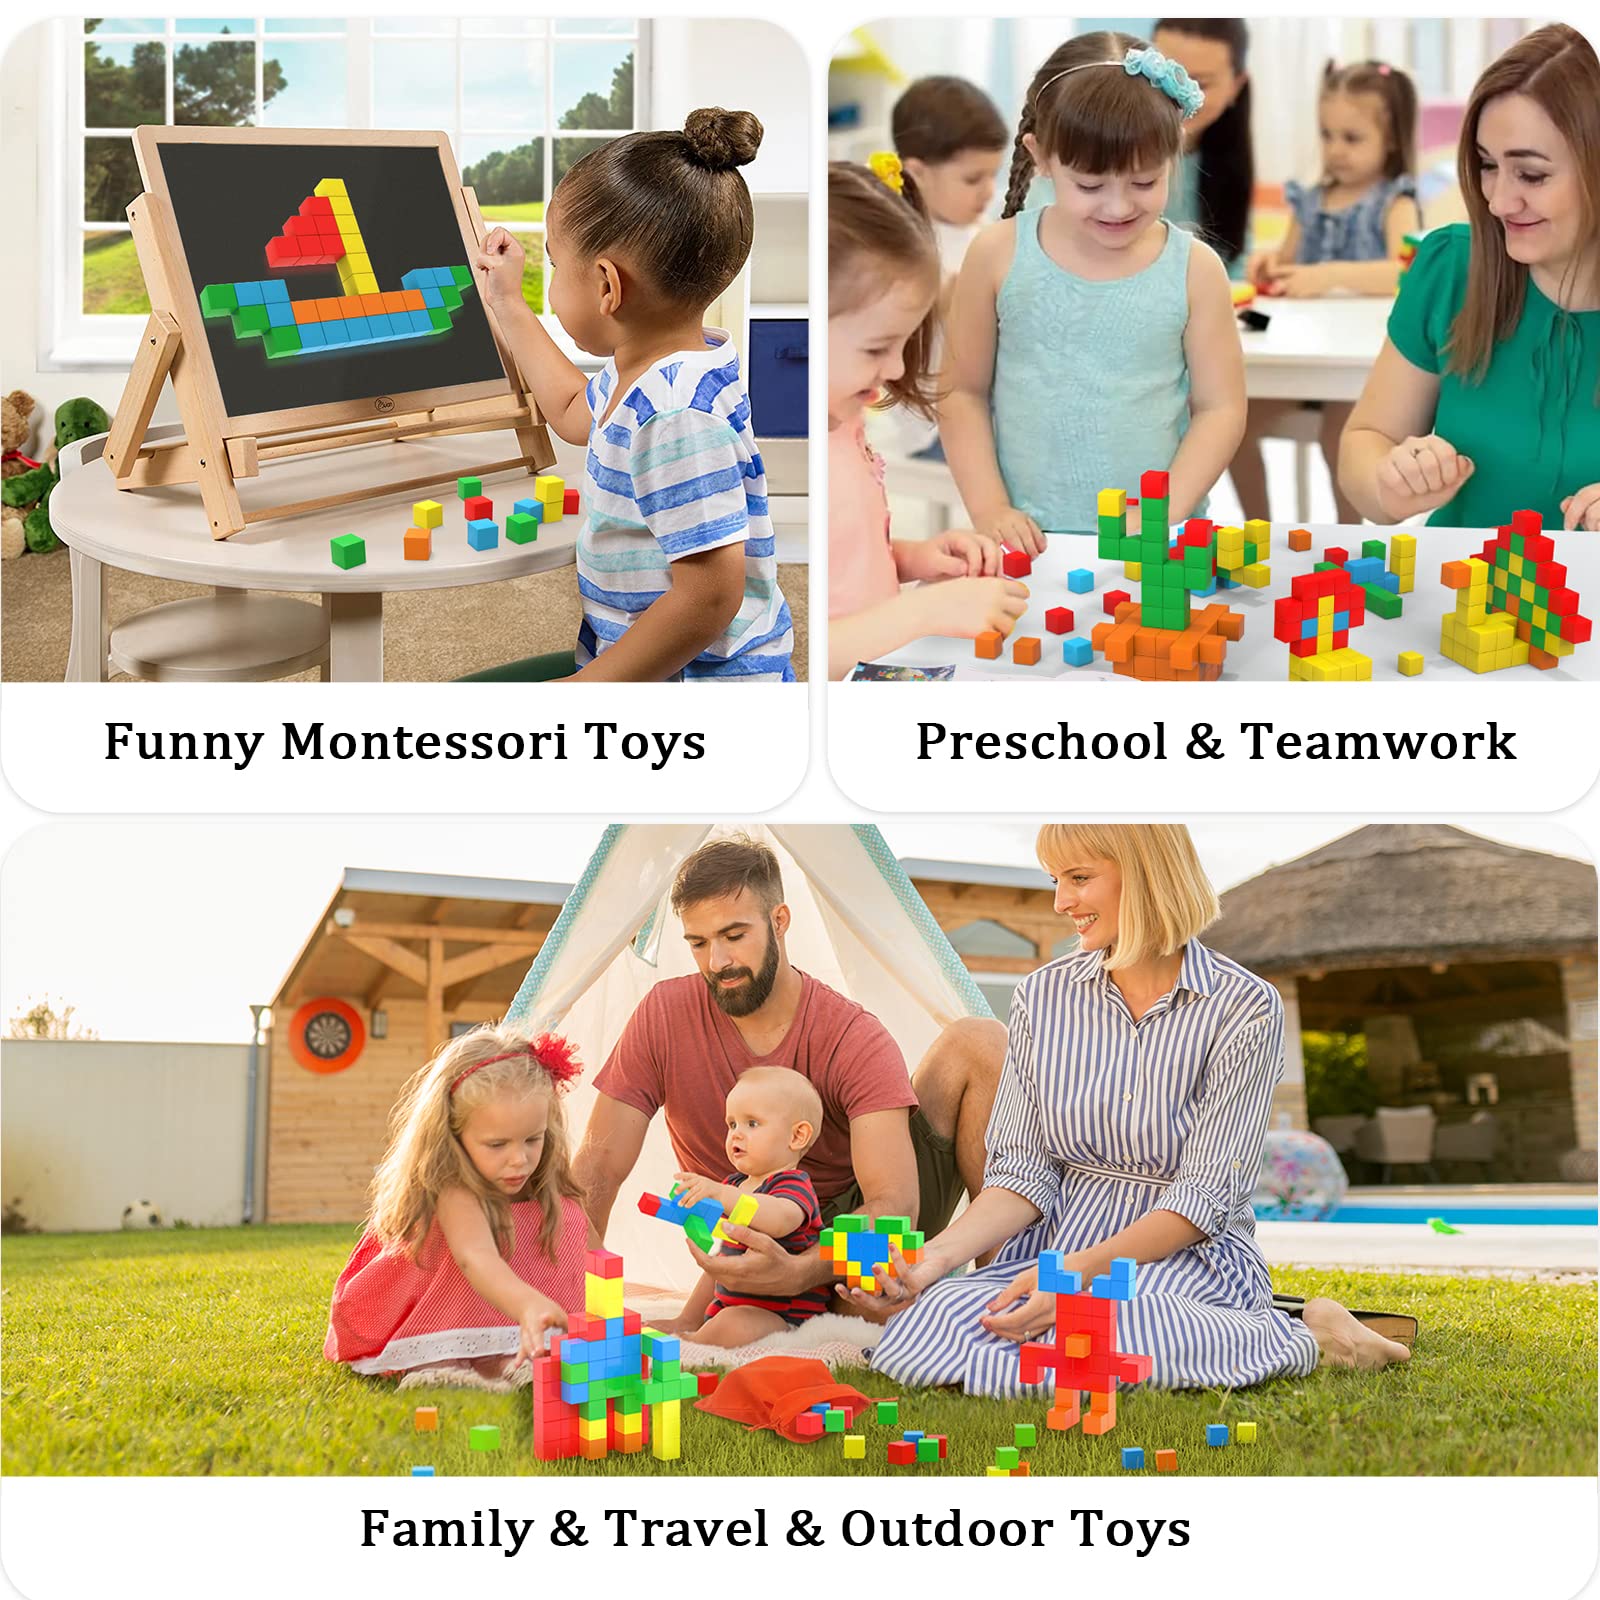 Large Magnetic Blocks for Toddler Toys, STEM Preschool Learning Sensory Montessori Outdoor Travel Building Toys Gifts for 3 4 5 6 Year Old Kids Boys Girls